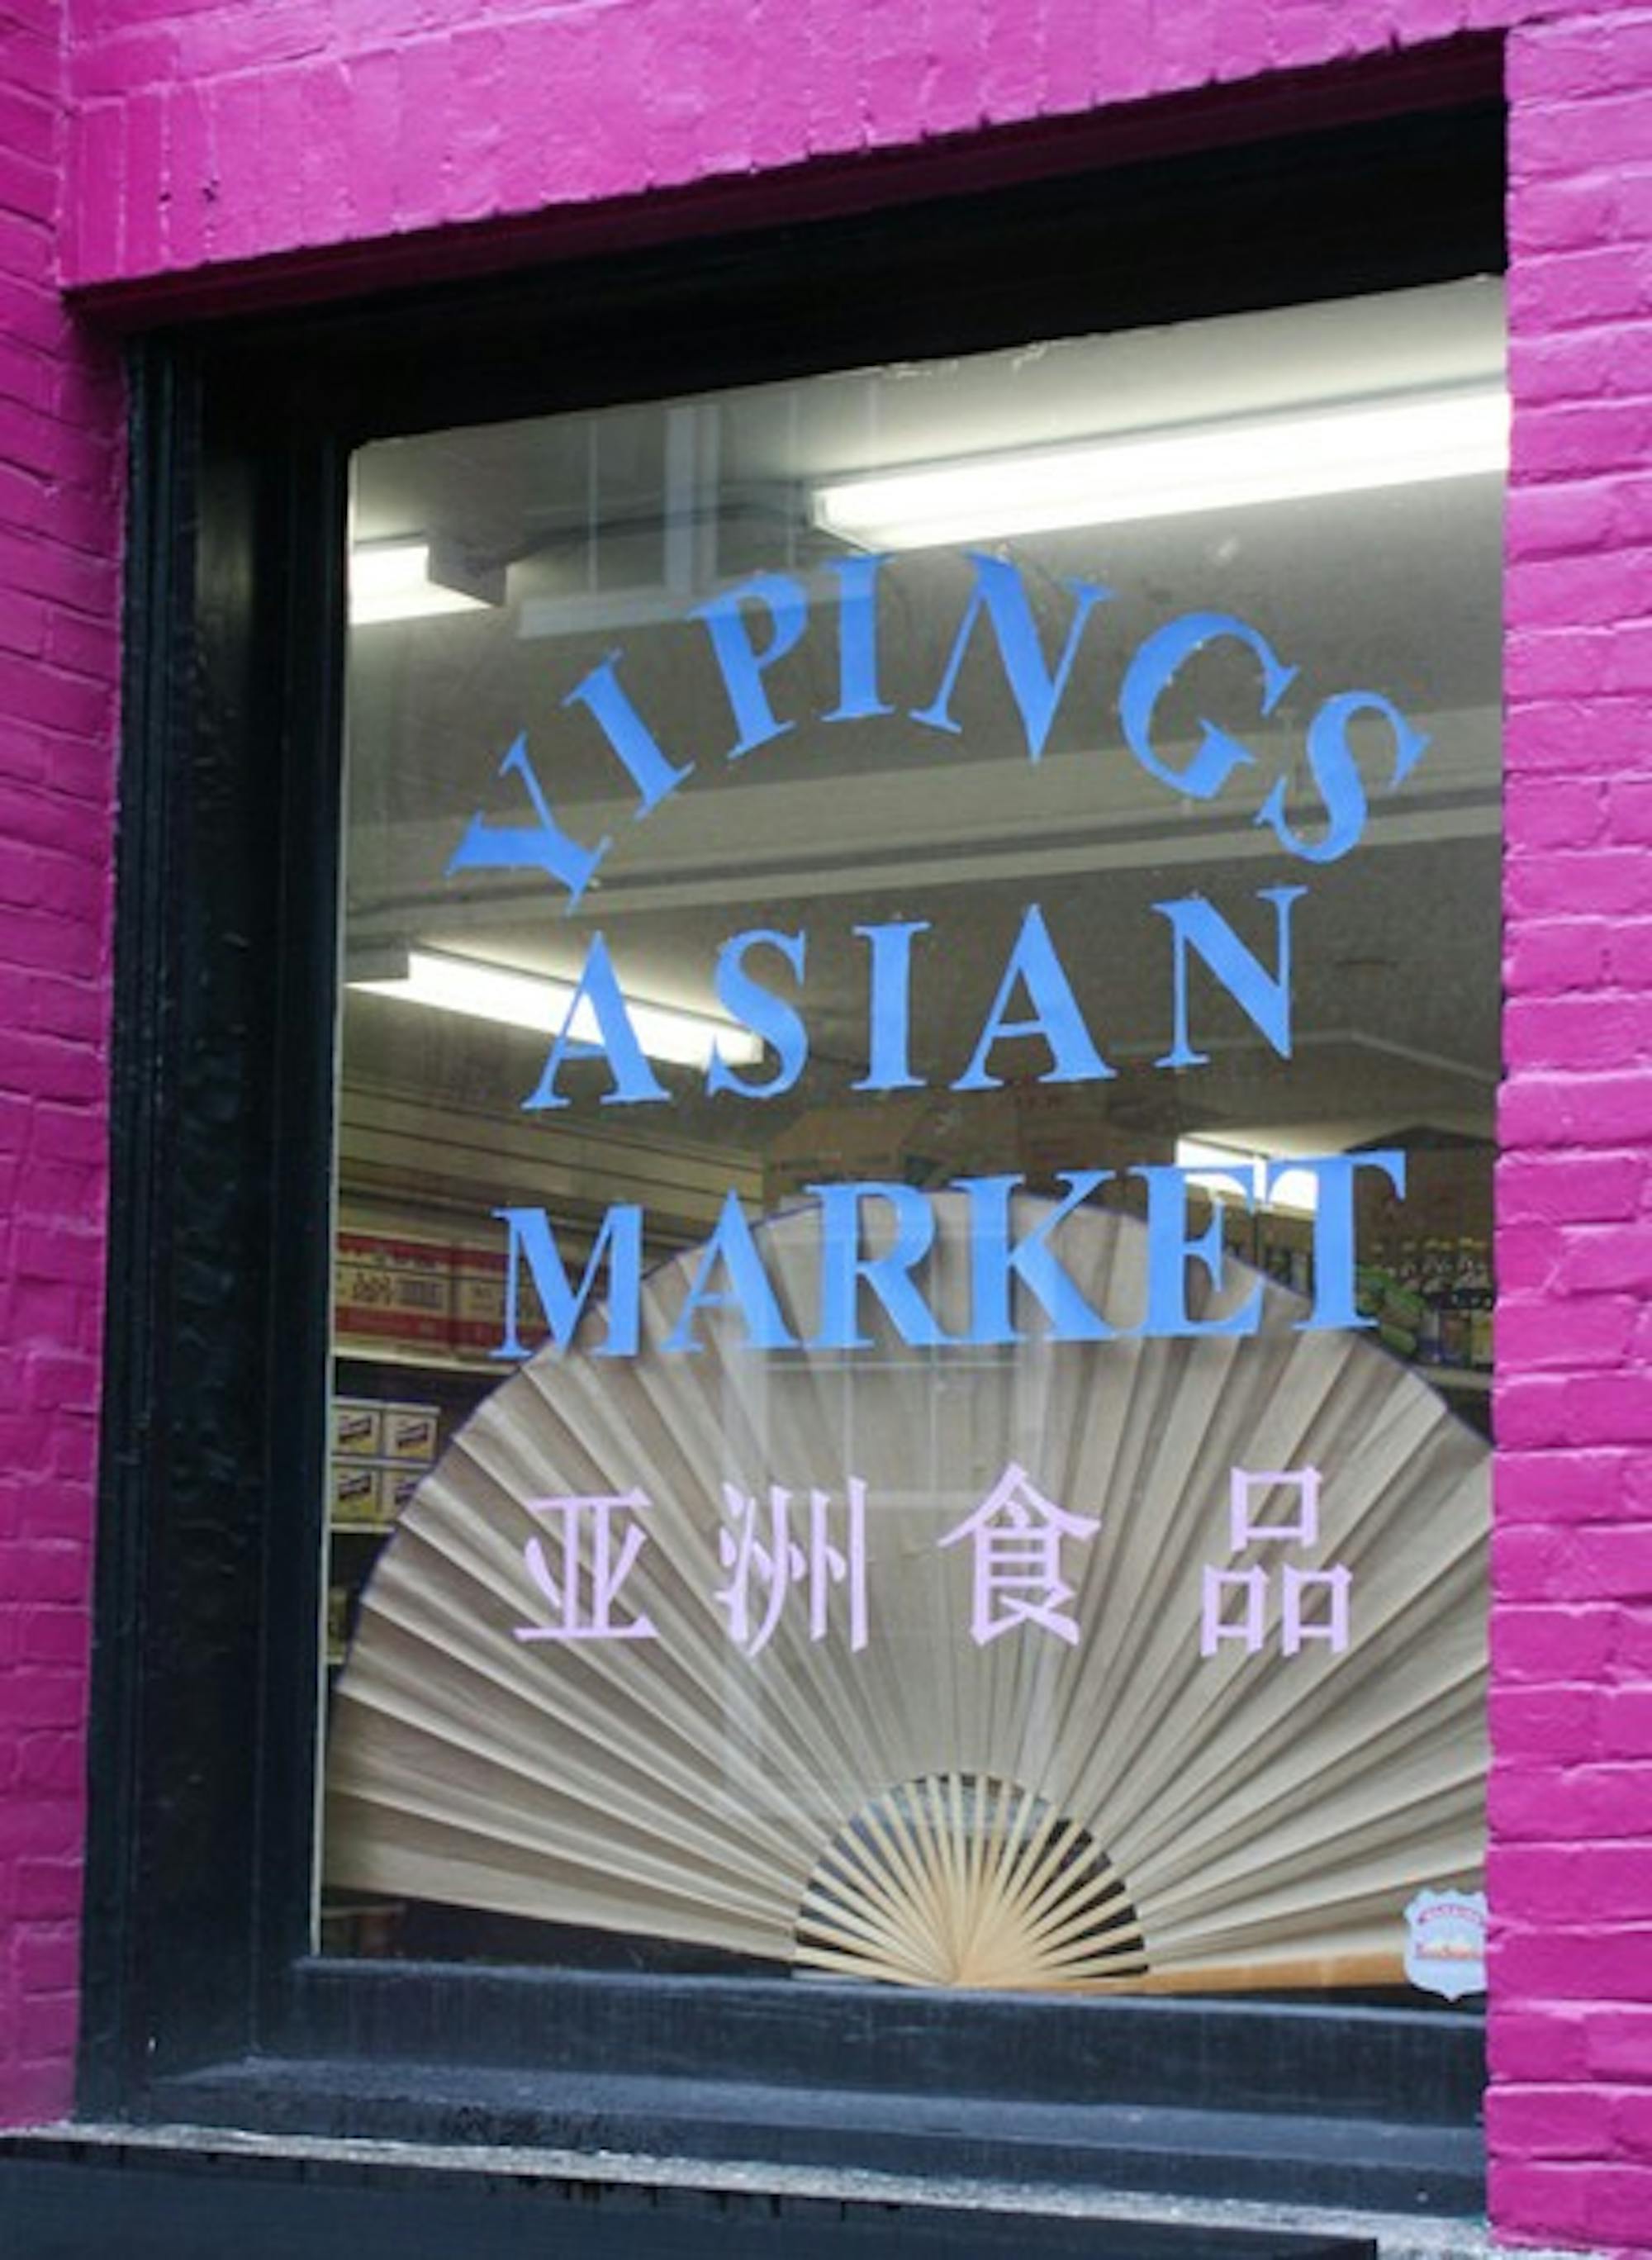 Yiping's Asian Market replaced Razzberry Kiss bead store in Hanover.